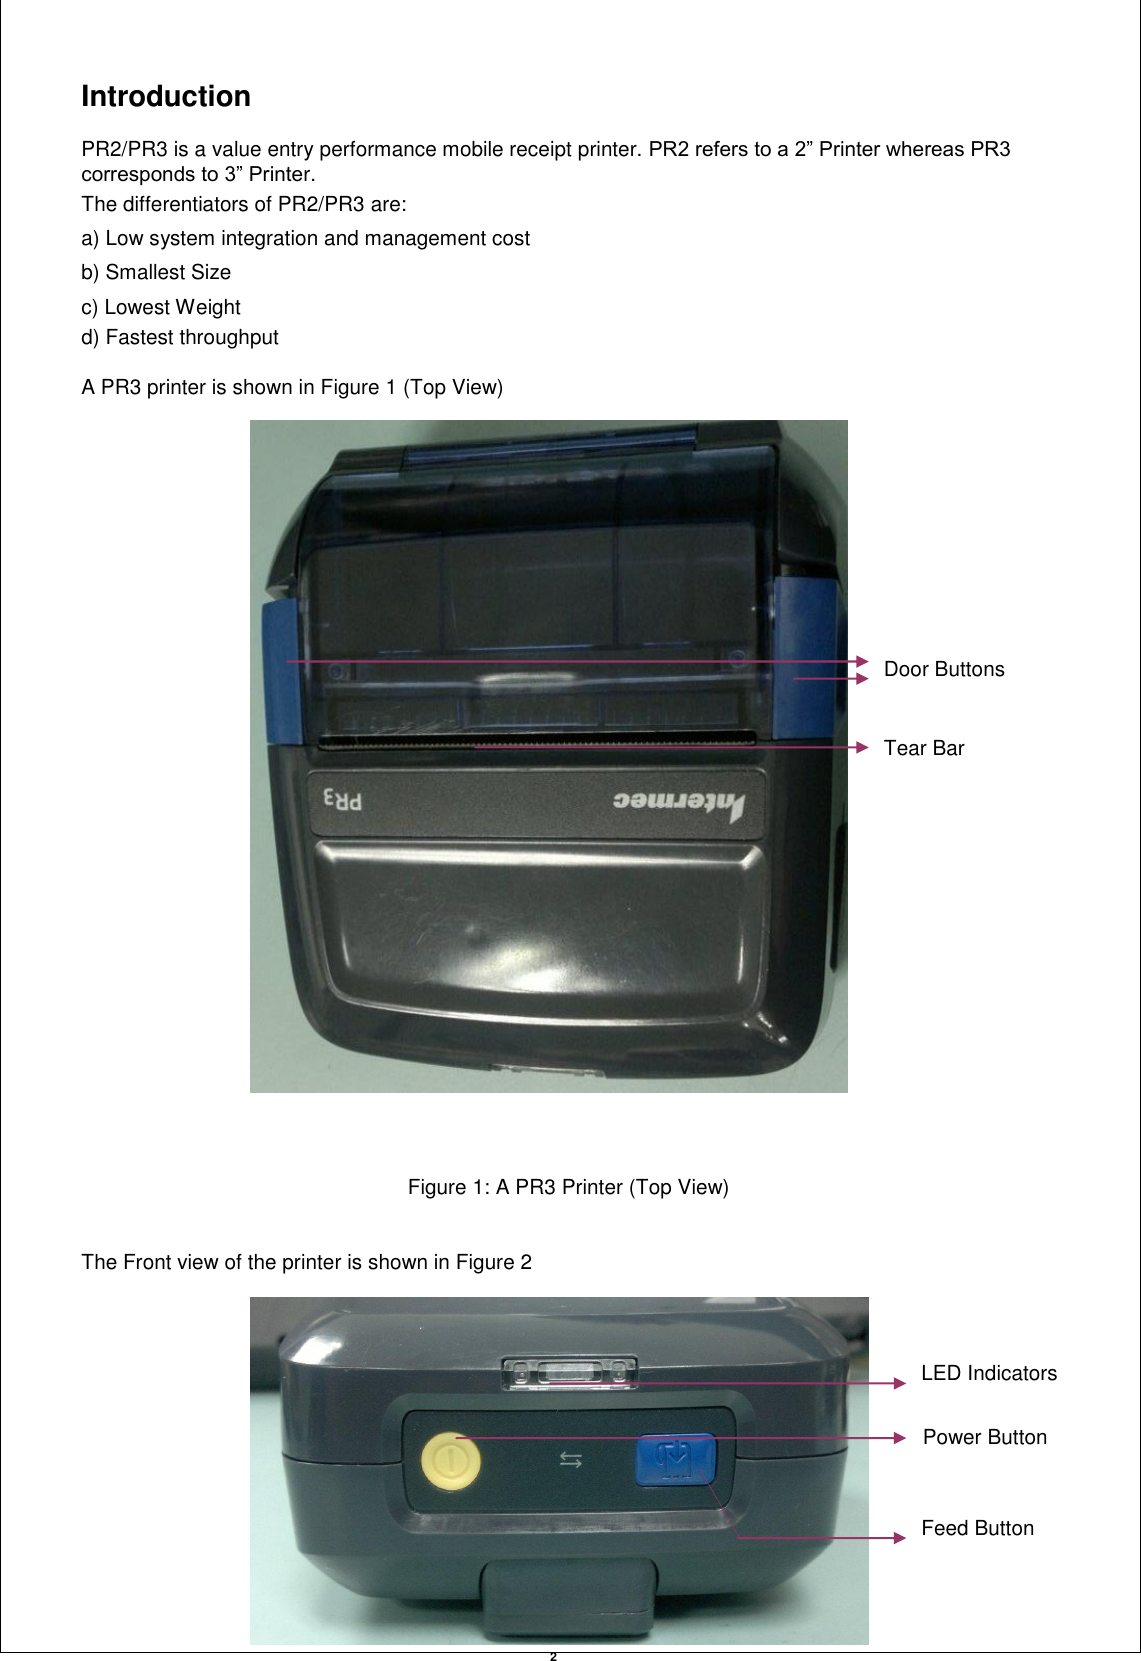   2 Introduction  PR2/PR3 is a value entry performance mobile receipt printer. PR2 refers to a 2” Printer whereas PR3 corresponds to 3” Printer. The differentiators of PR2/PR3 are: a) Low system integration and management cost b) Smallest Size c) Lowest Weight d) Fastest throughput  A PR3 printer is shown in Figure 1 (Top View)                                                  Figure 1: A PR3 Printer (Top View)   The Front view of the printer is shown in Figure 2  Door Buttons Tear Bar LED Indicators Power Button Feed Button 